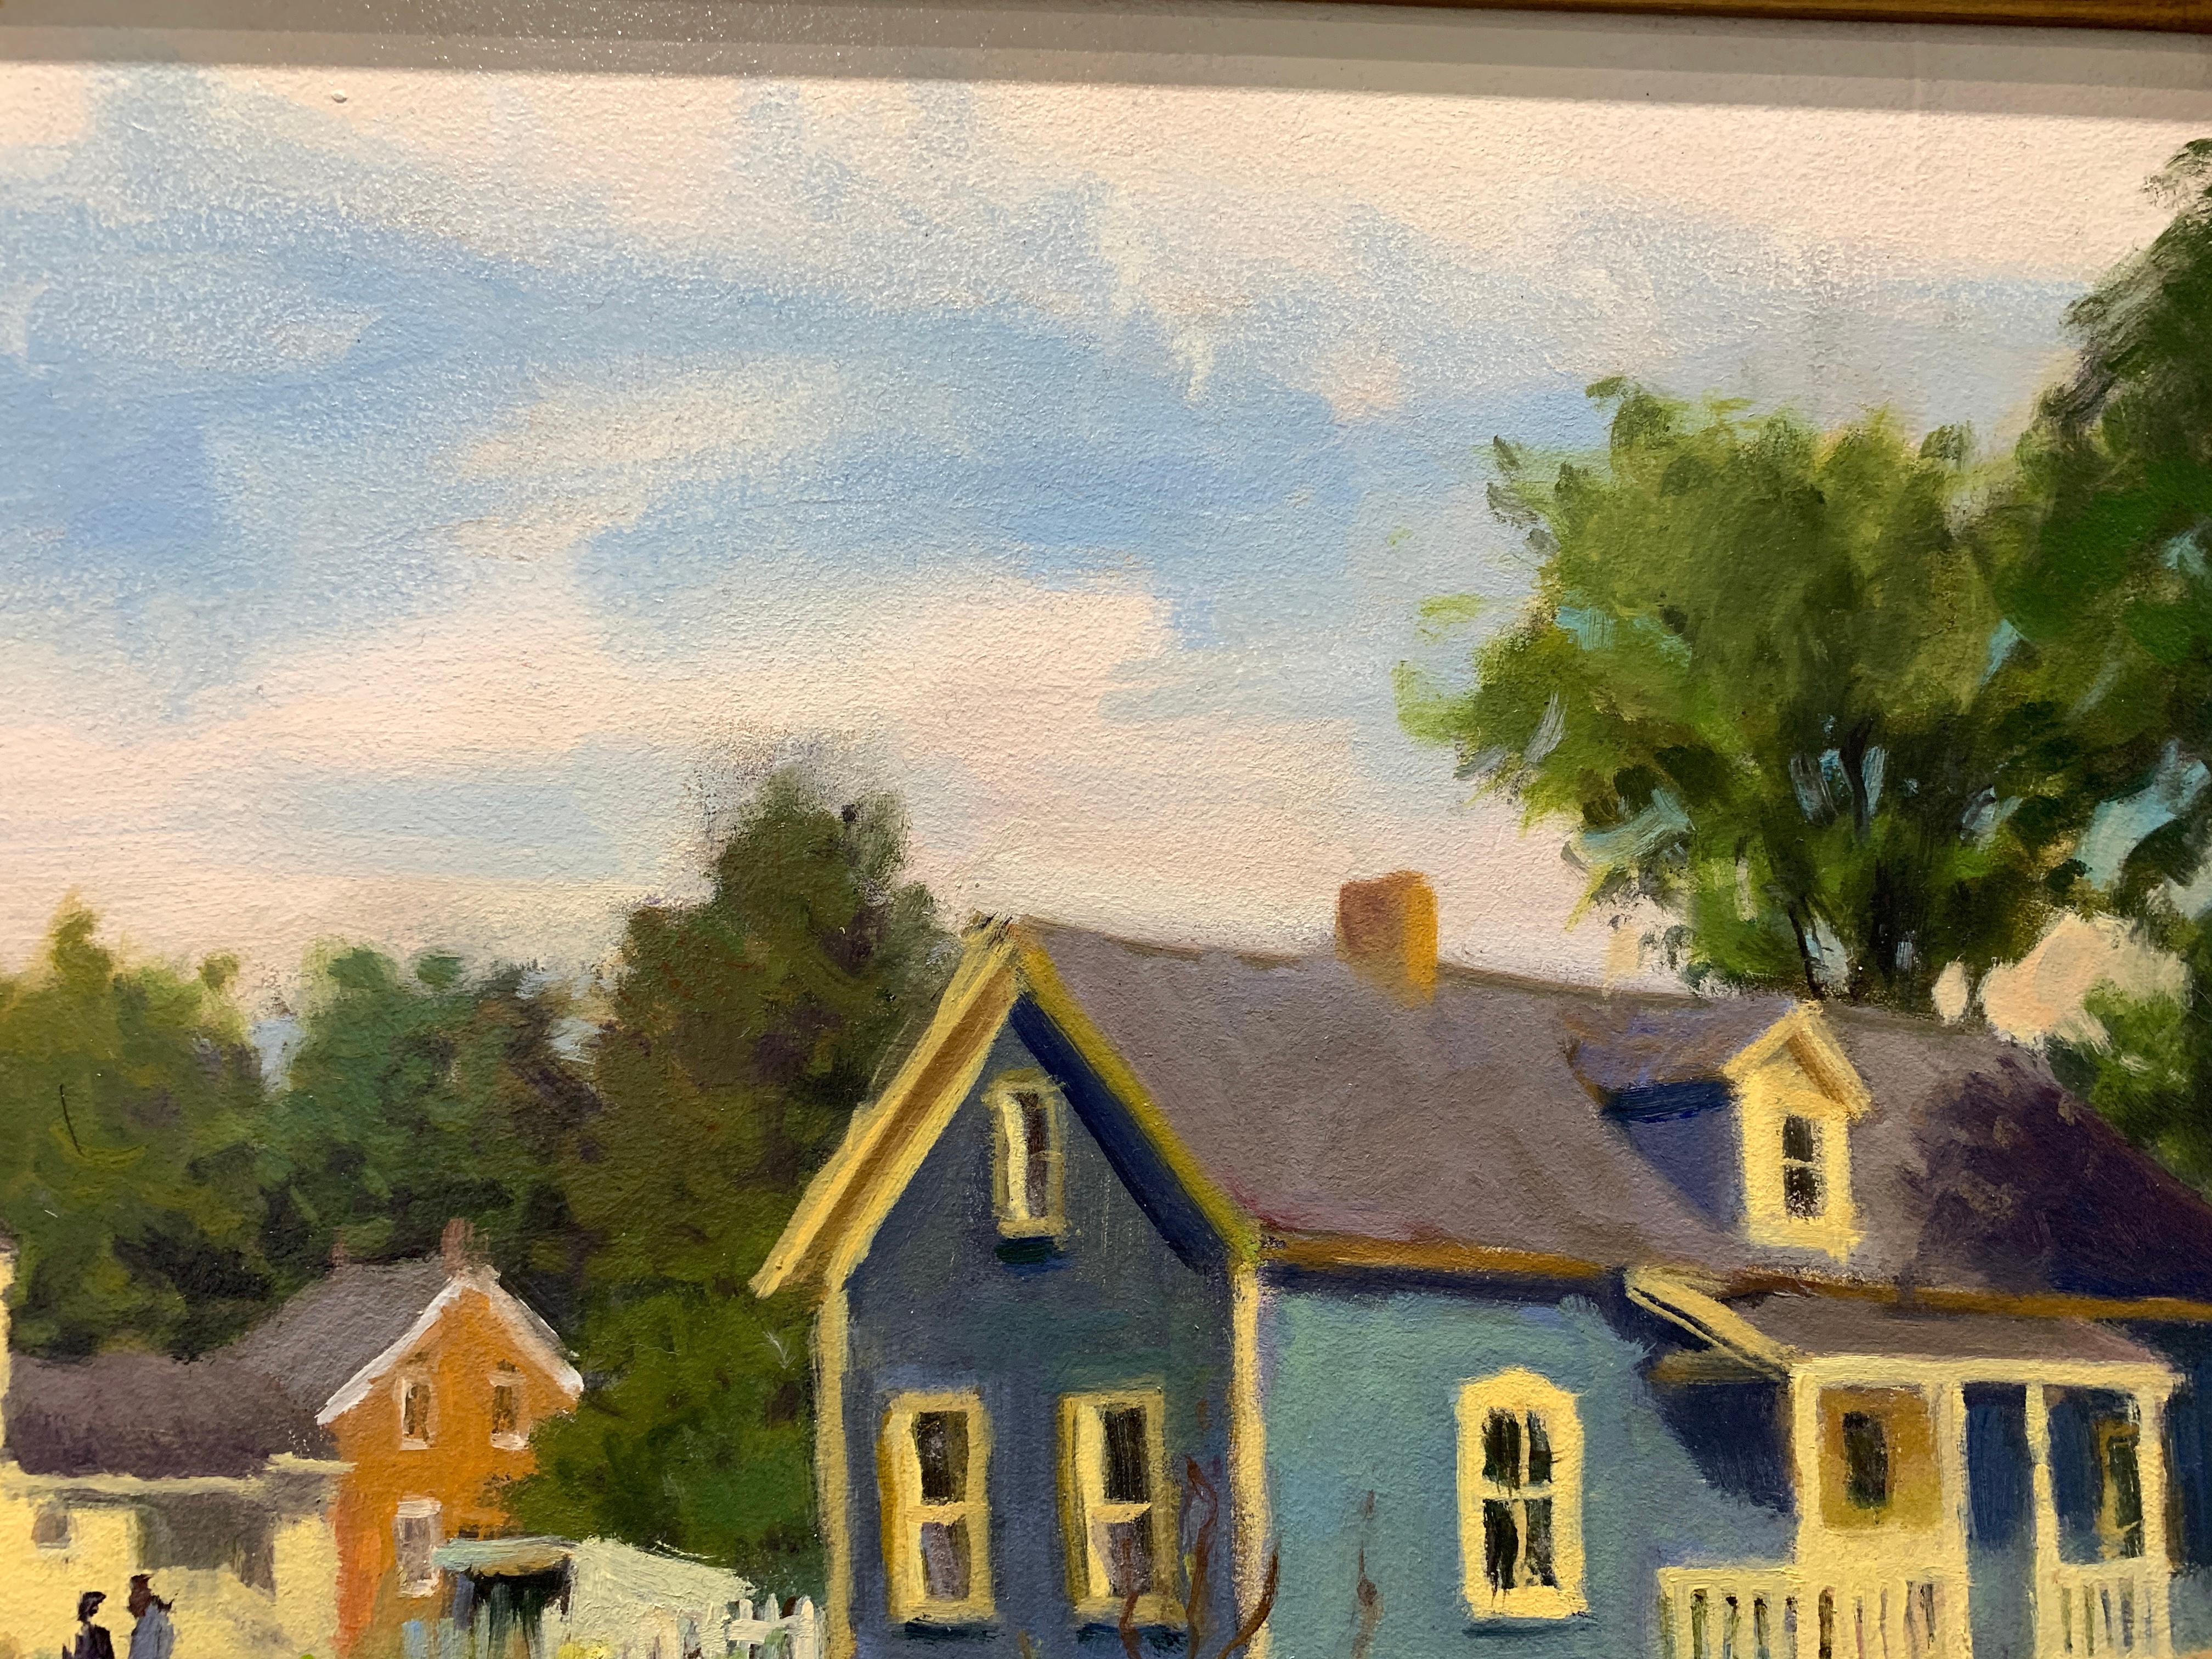 An oil painting of the exteriors of a grouping of historic homes, in various colors, on a sunny day. A white picket fence encases a garden in the foreground. 

Dimensions: 12 x 24 inches
Framed dimensions: 18.75 x 30.75 inches

Carl Bretzke is a